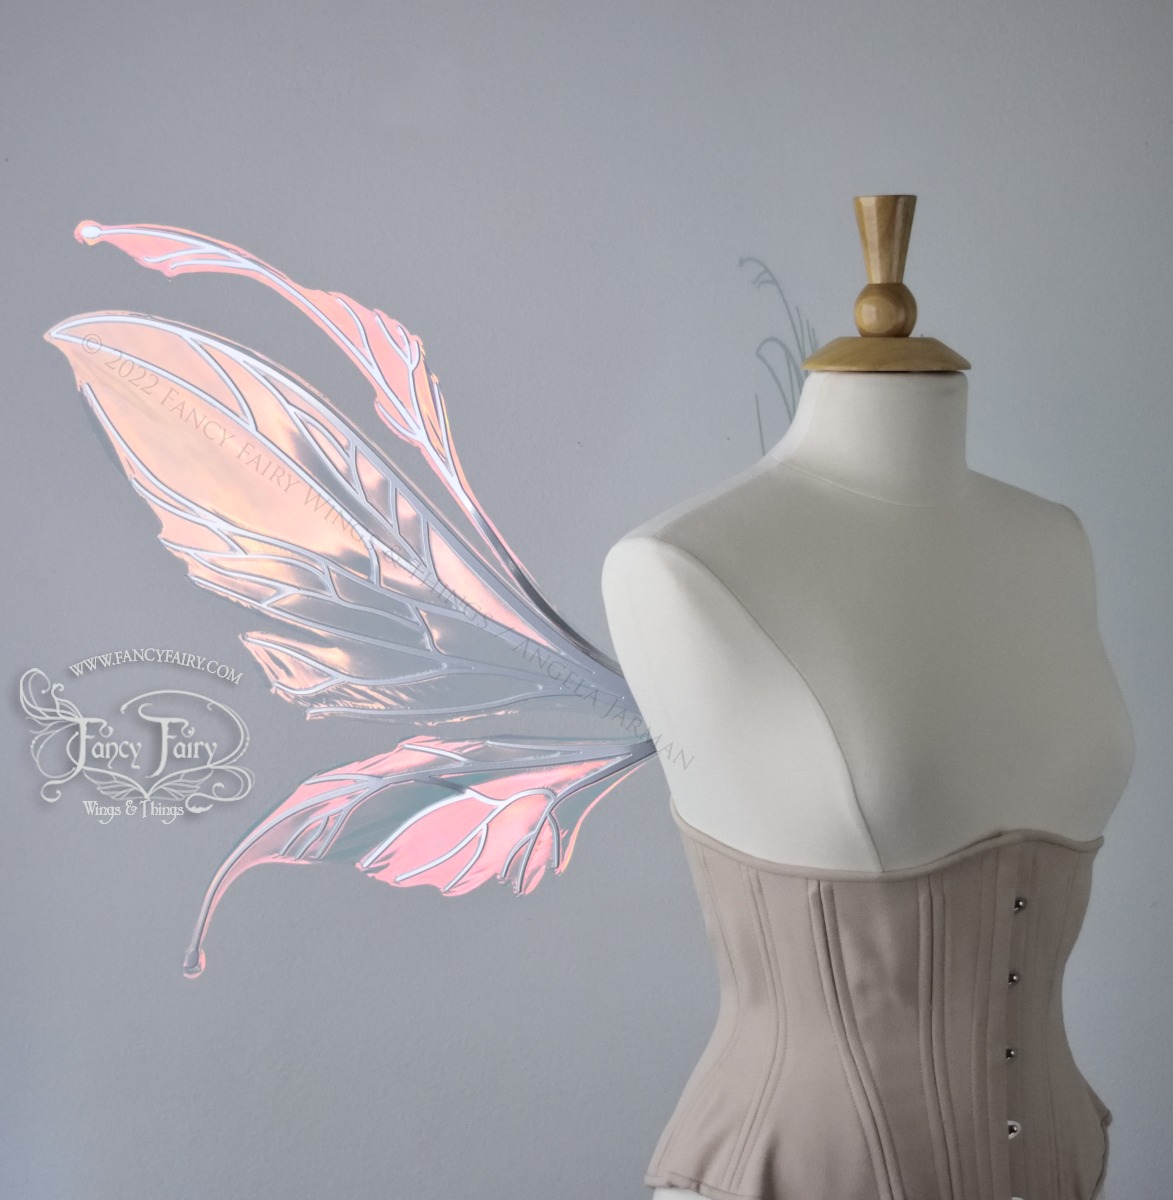 Datura Iridescent Convertible Fairy Wings in Clear Blush with Silver veins, Ready to Ship